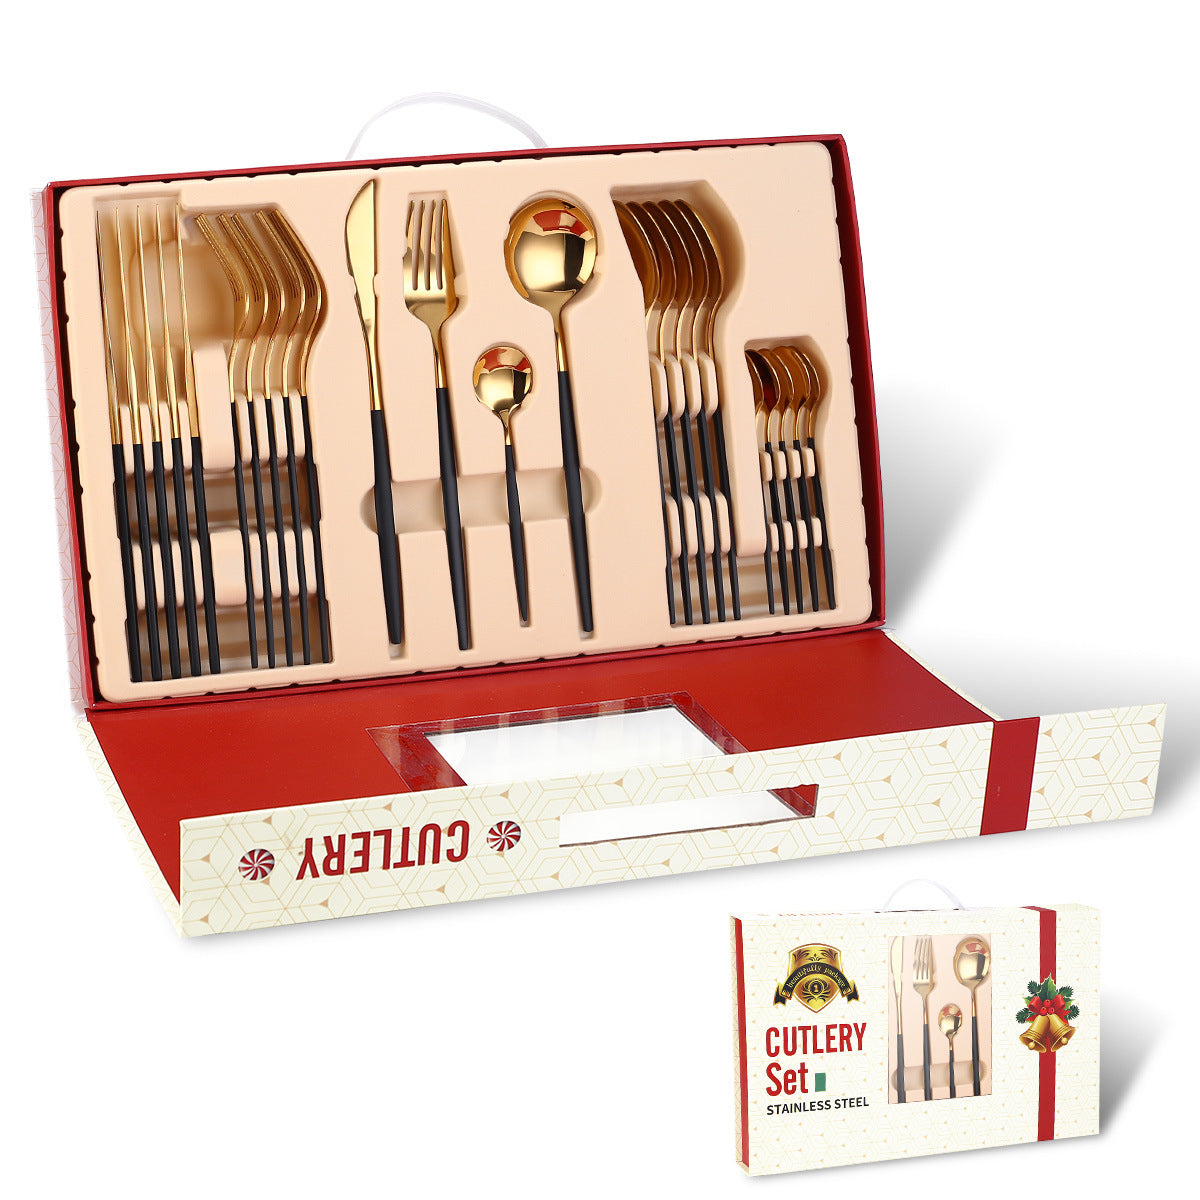 Portugal Stainless Steel Knife, Fork And Spoon Gold-Plated Spray Paint 24-Piece Gift Tableware Set